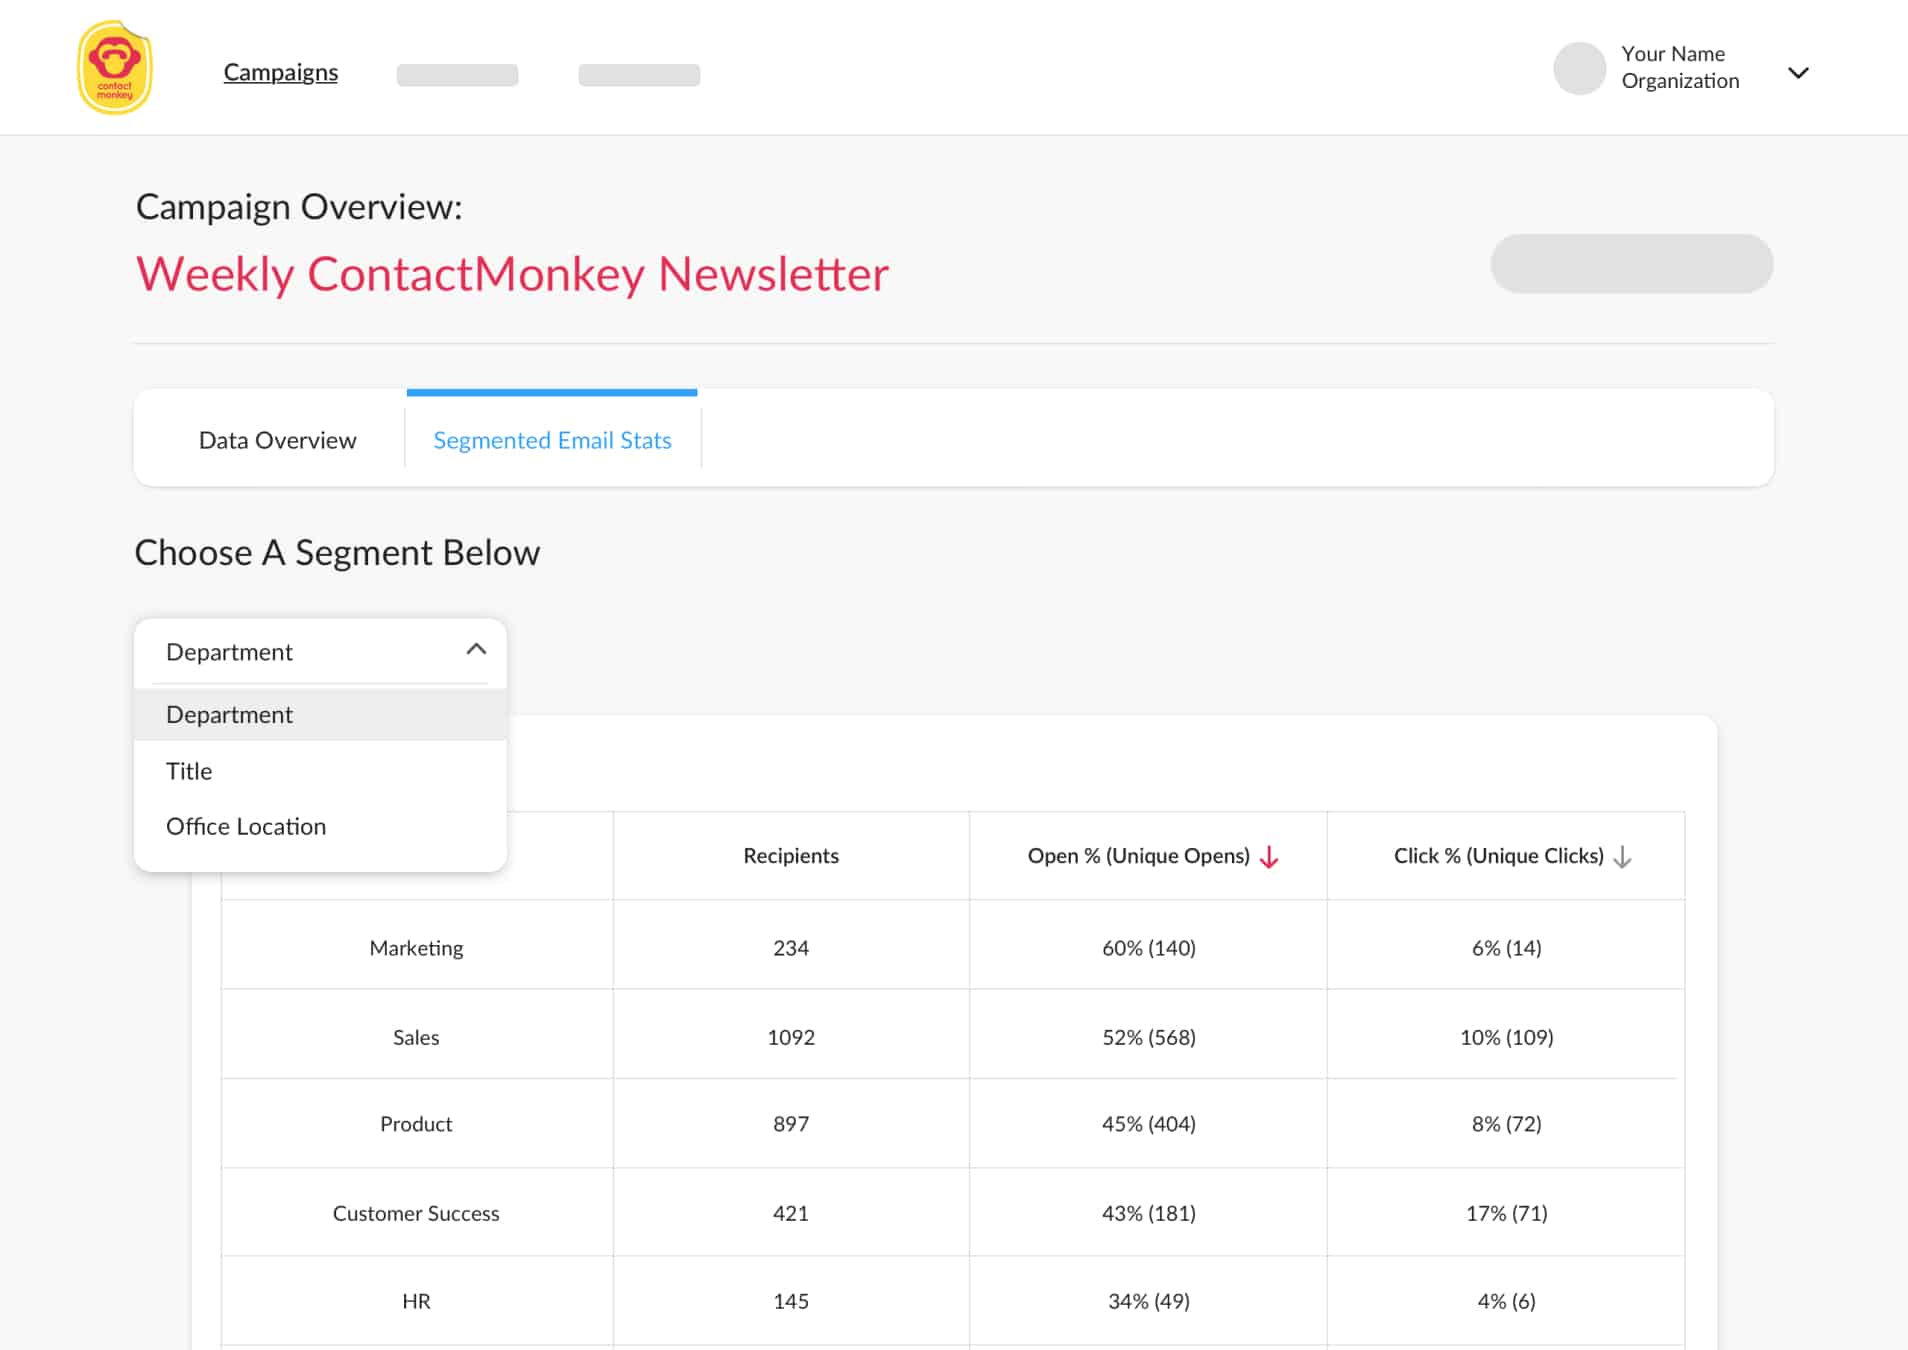 ContactMonkey's segmented email stats where users can sort and compare email metrics.